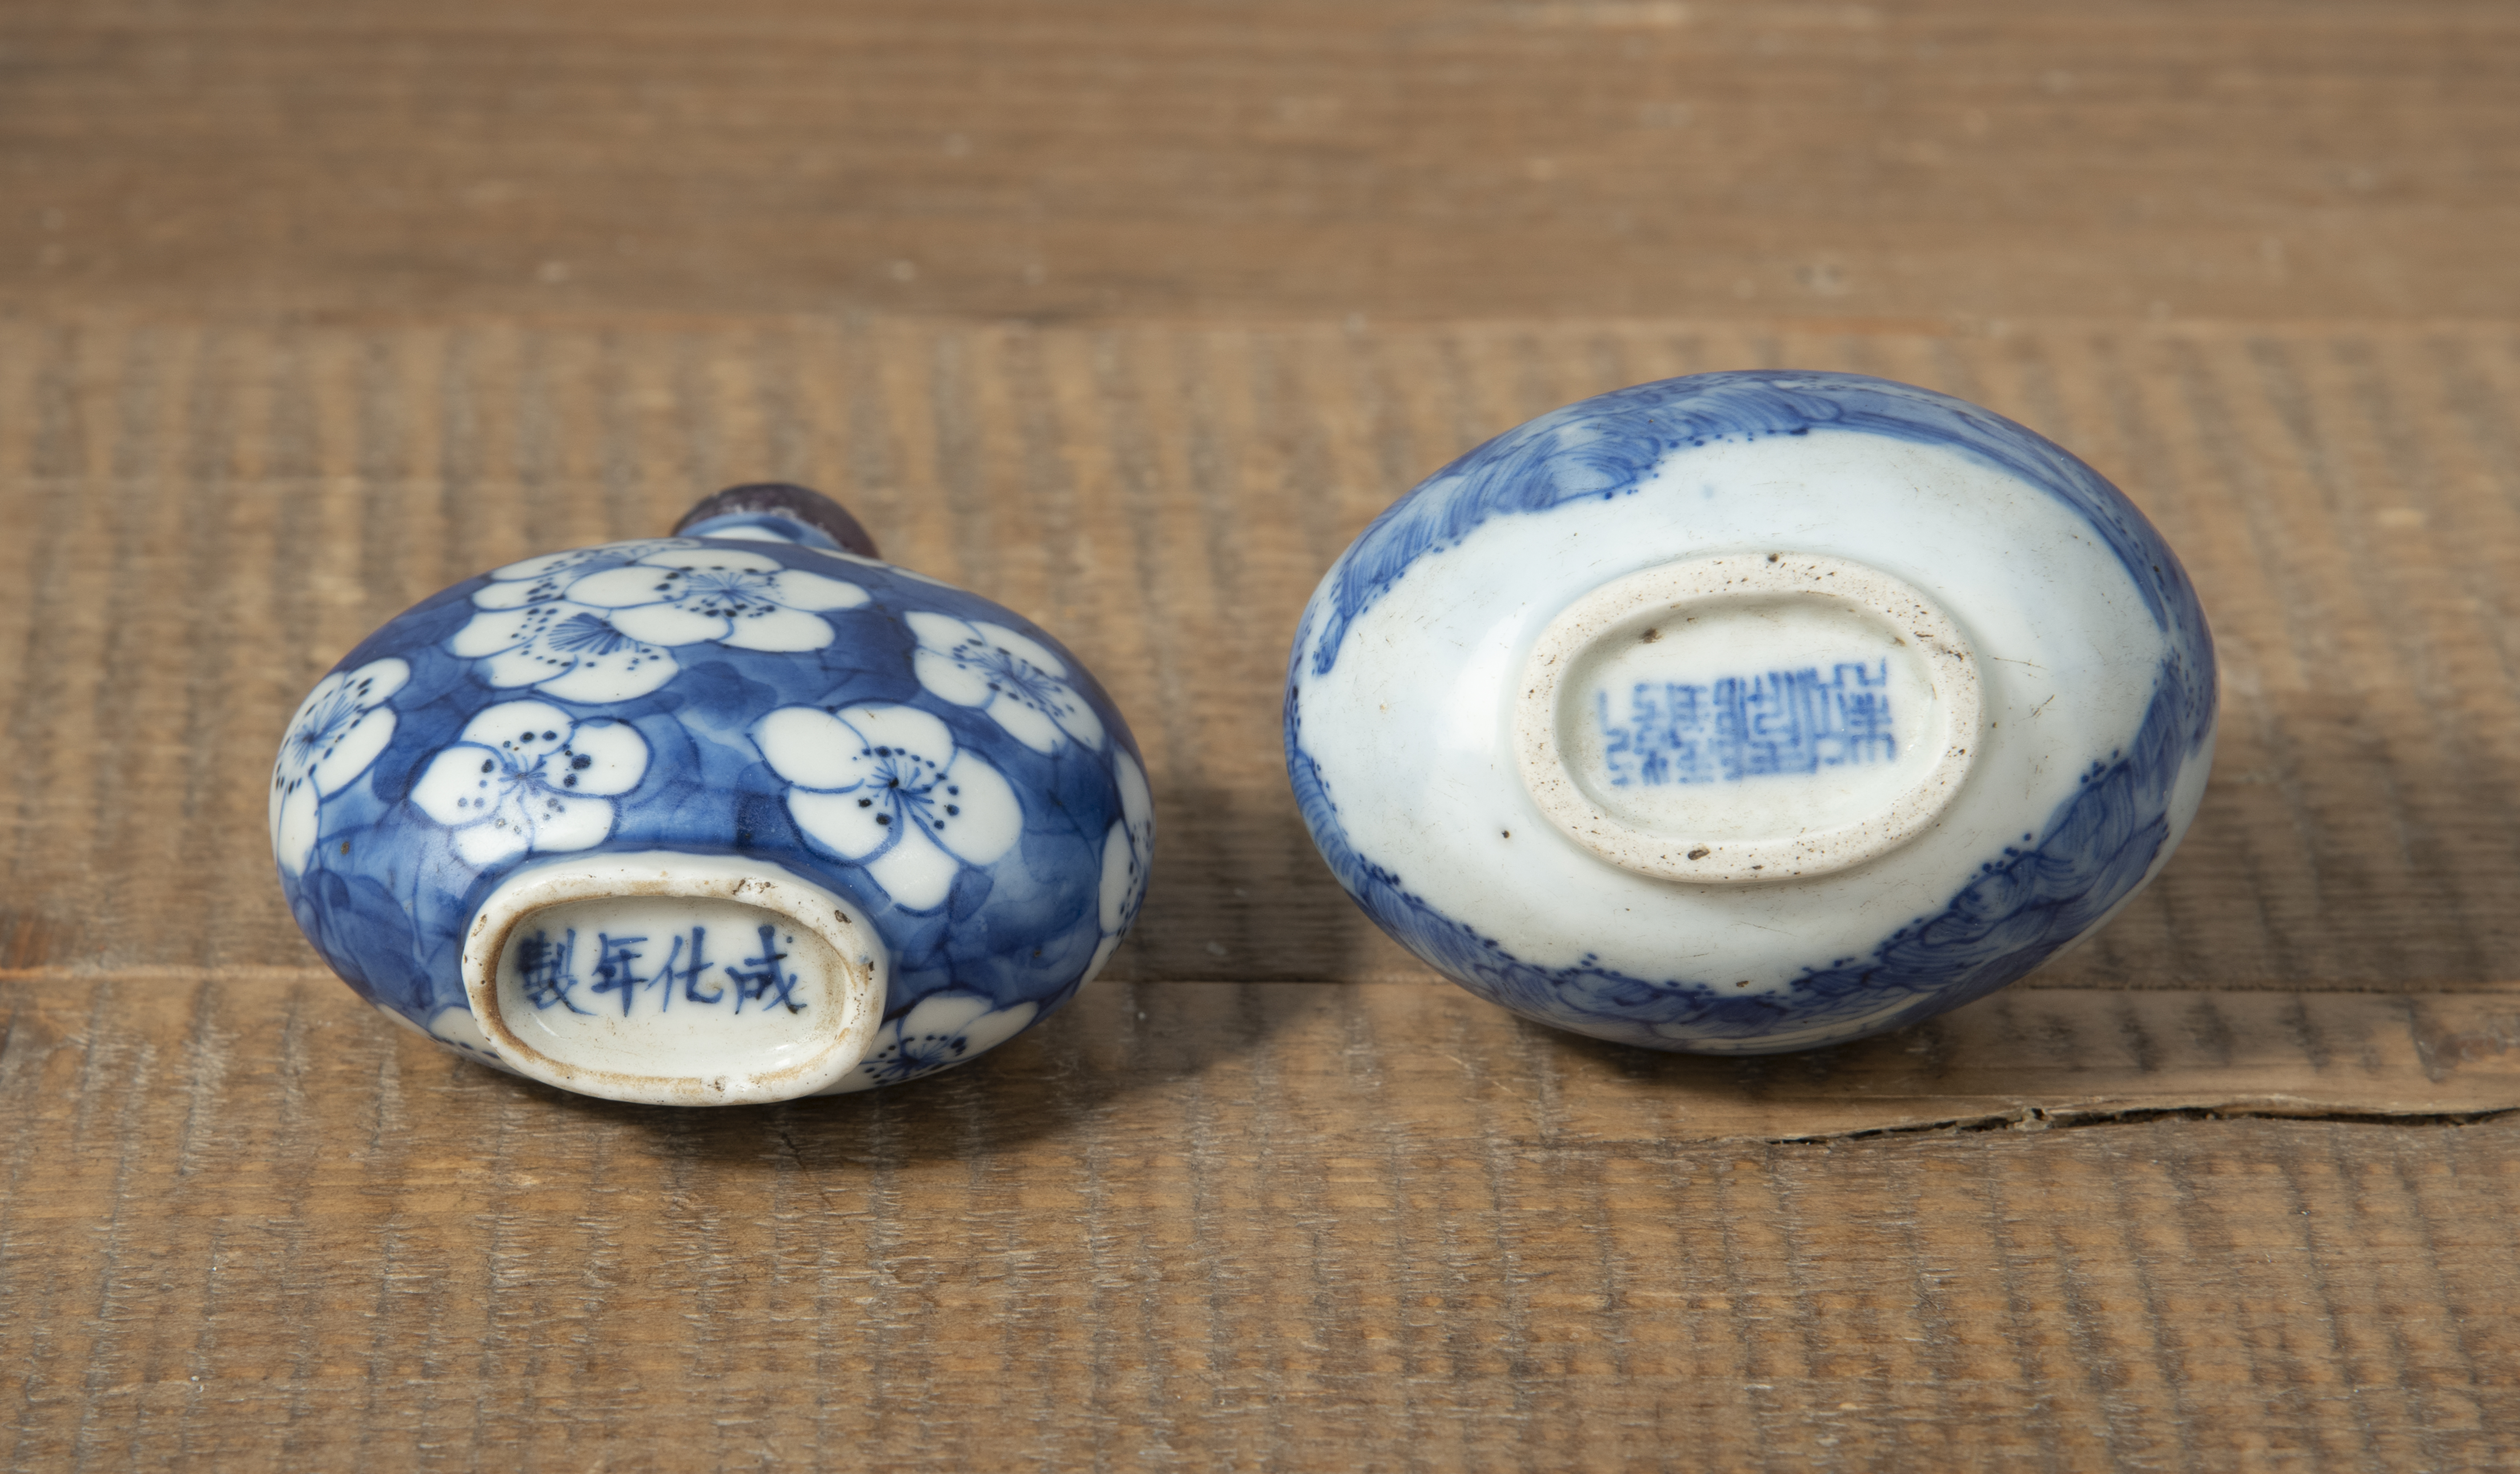 TWO BLUE AND WHITE PORCELAIN SNUFF BOTTLES DEPICTING PLUM BLOSSOMS AND A MOUNTAIN LANDSCAPE - Image 3 of 4